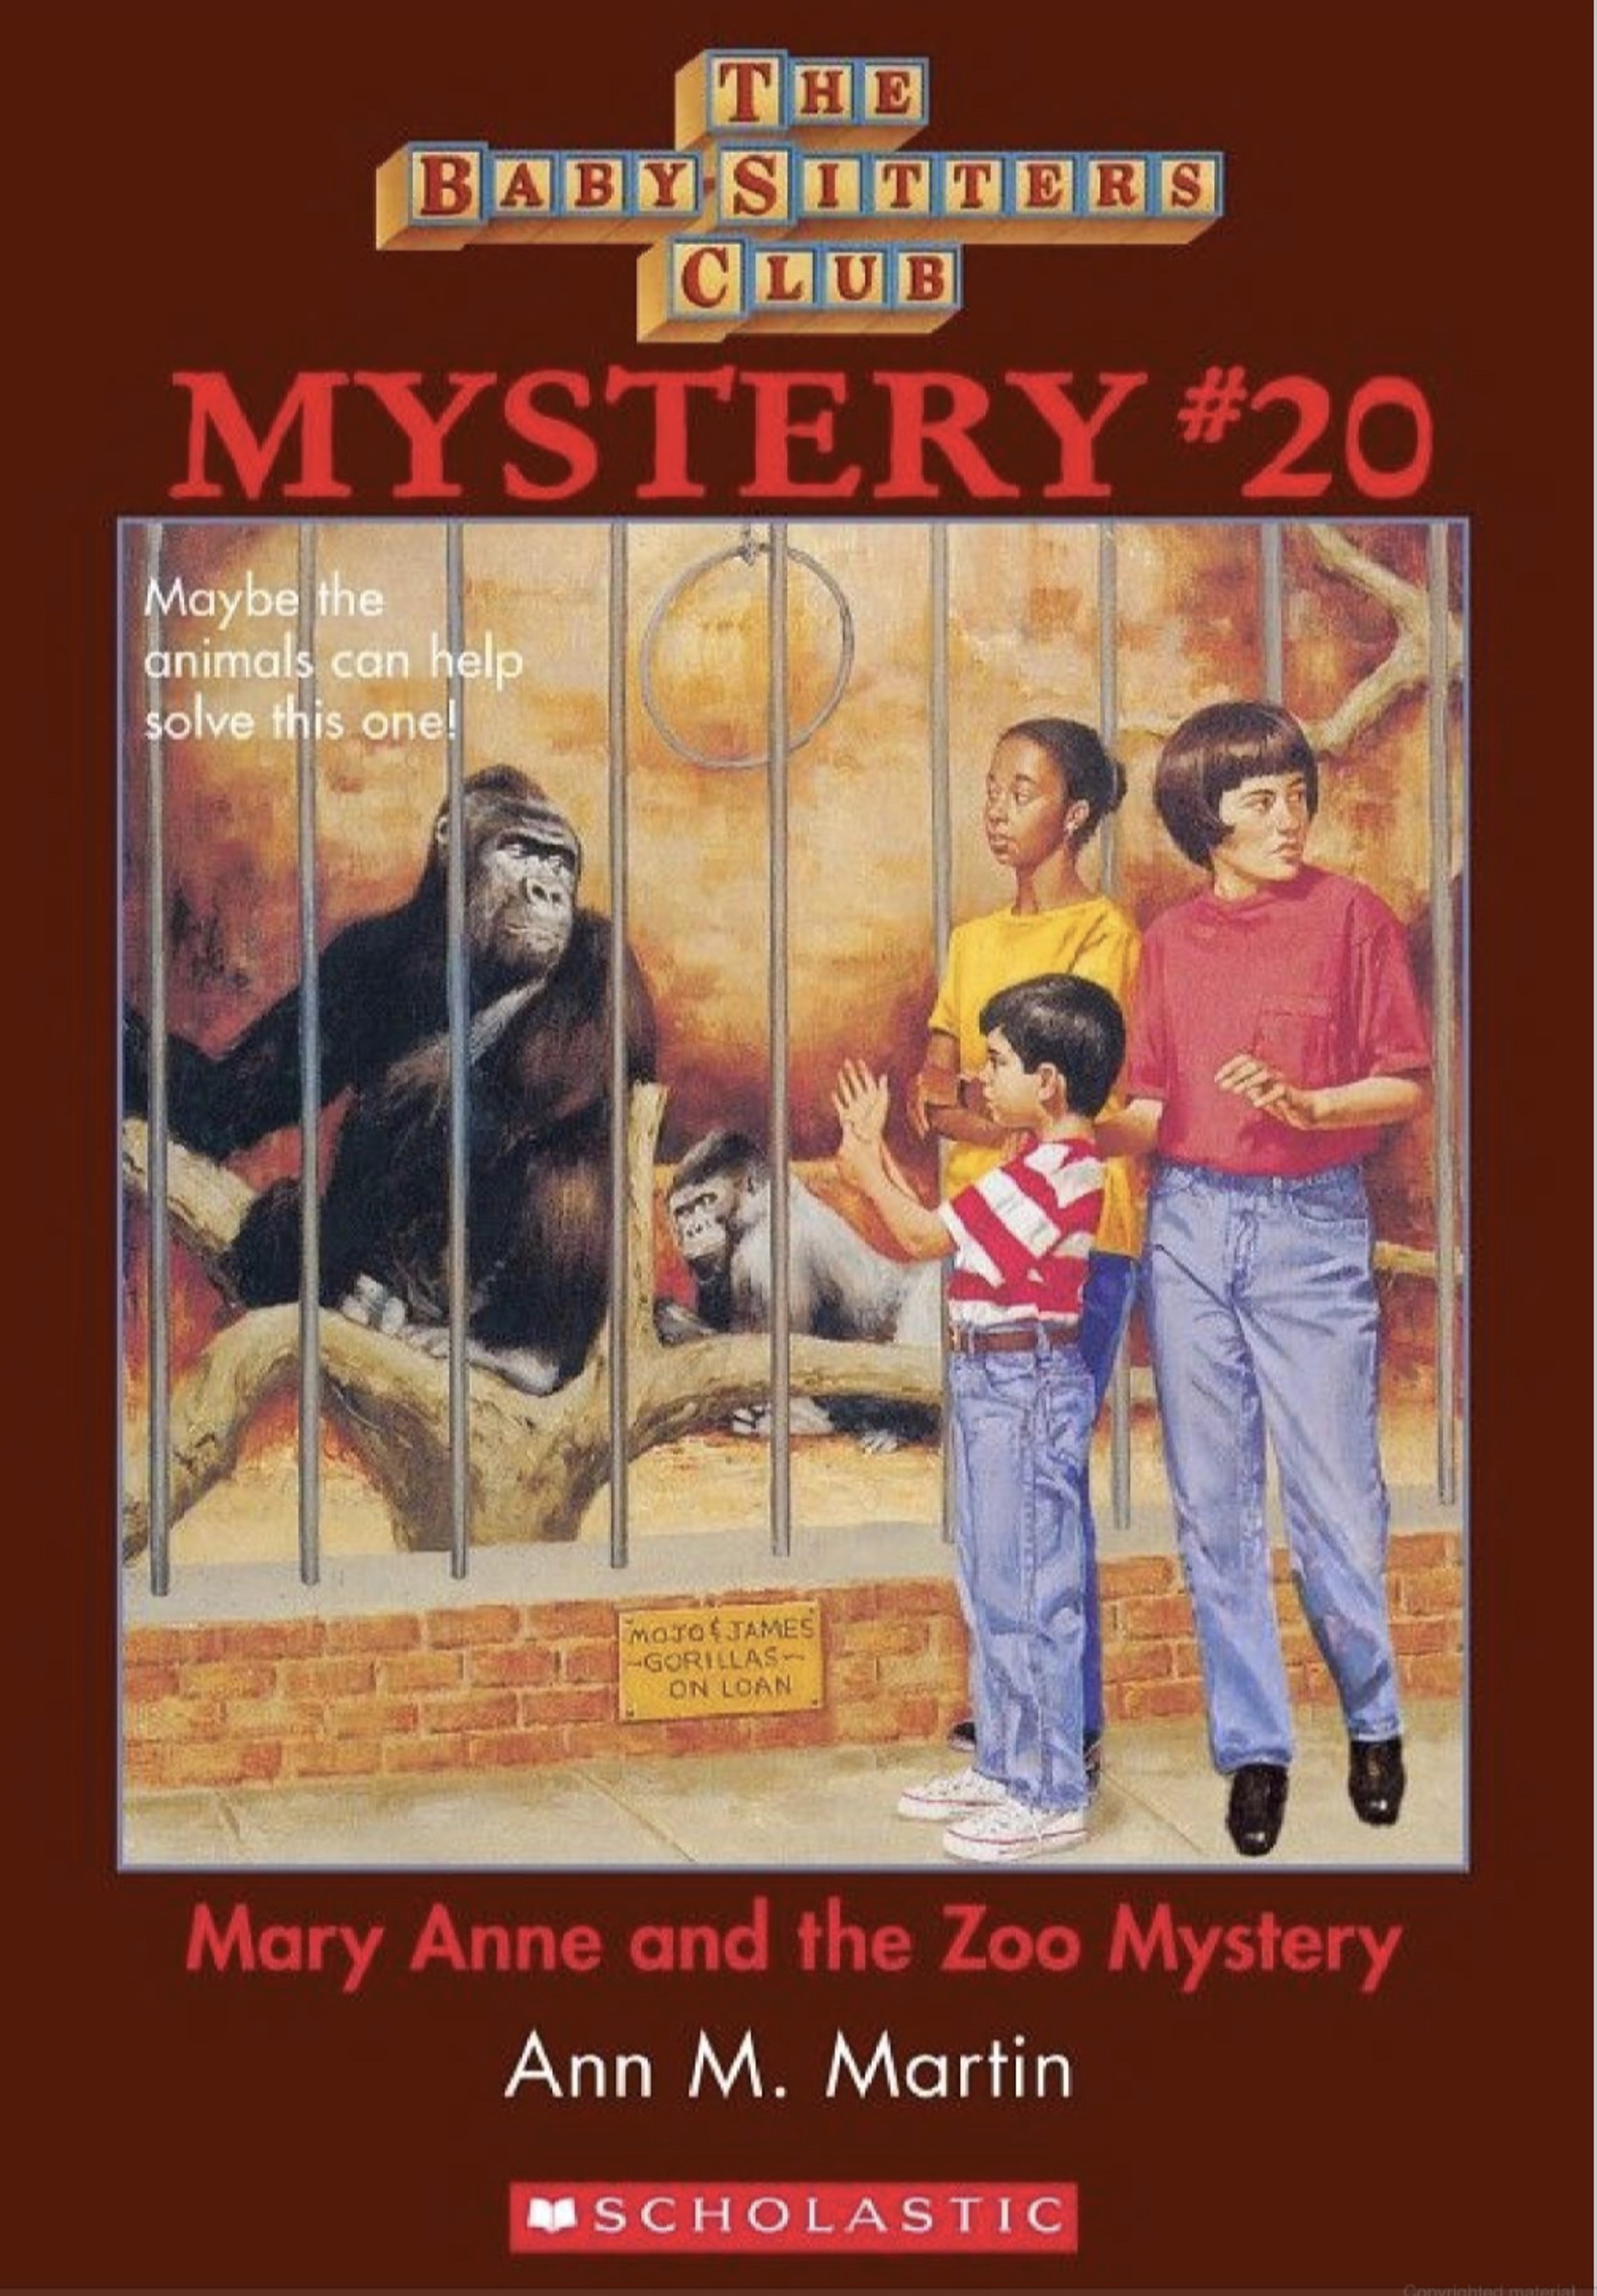 The Babysitter’s Club #20 “Mary Anne and the Zoo Mystery” by Hodges Soileau